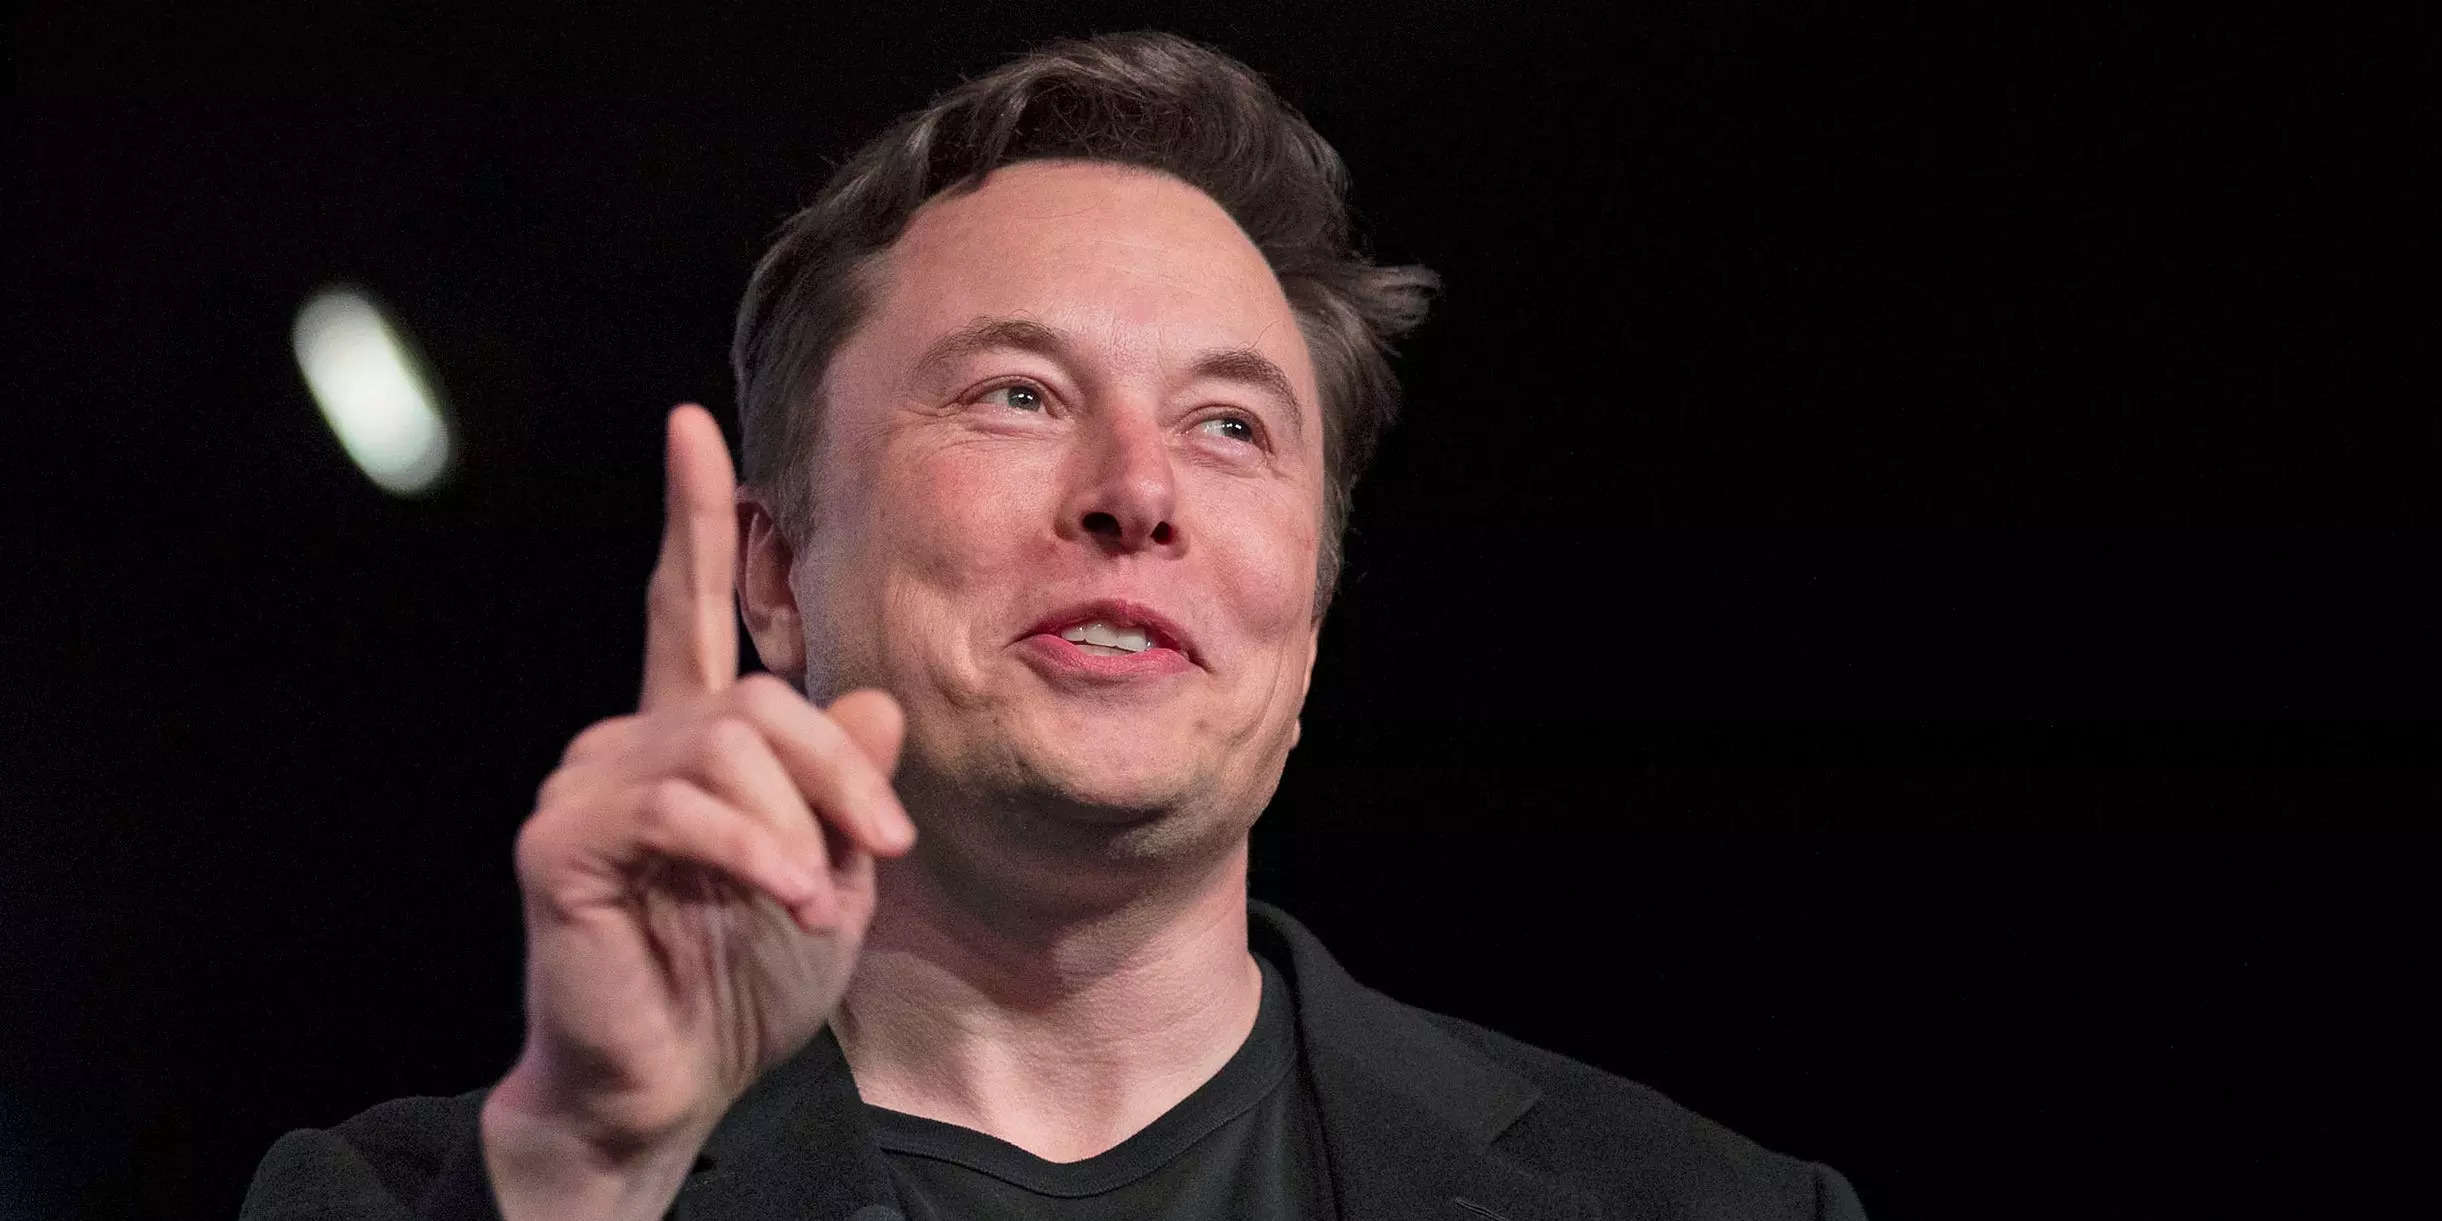 Elon Musk says Tesla's value could soar to $4.4 trillion, Twitter might be  worth $400 billion, and the Fed should cut rates. Here are his 10 best  quotes from a Q3 earnings